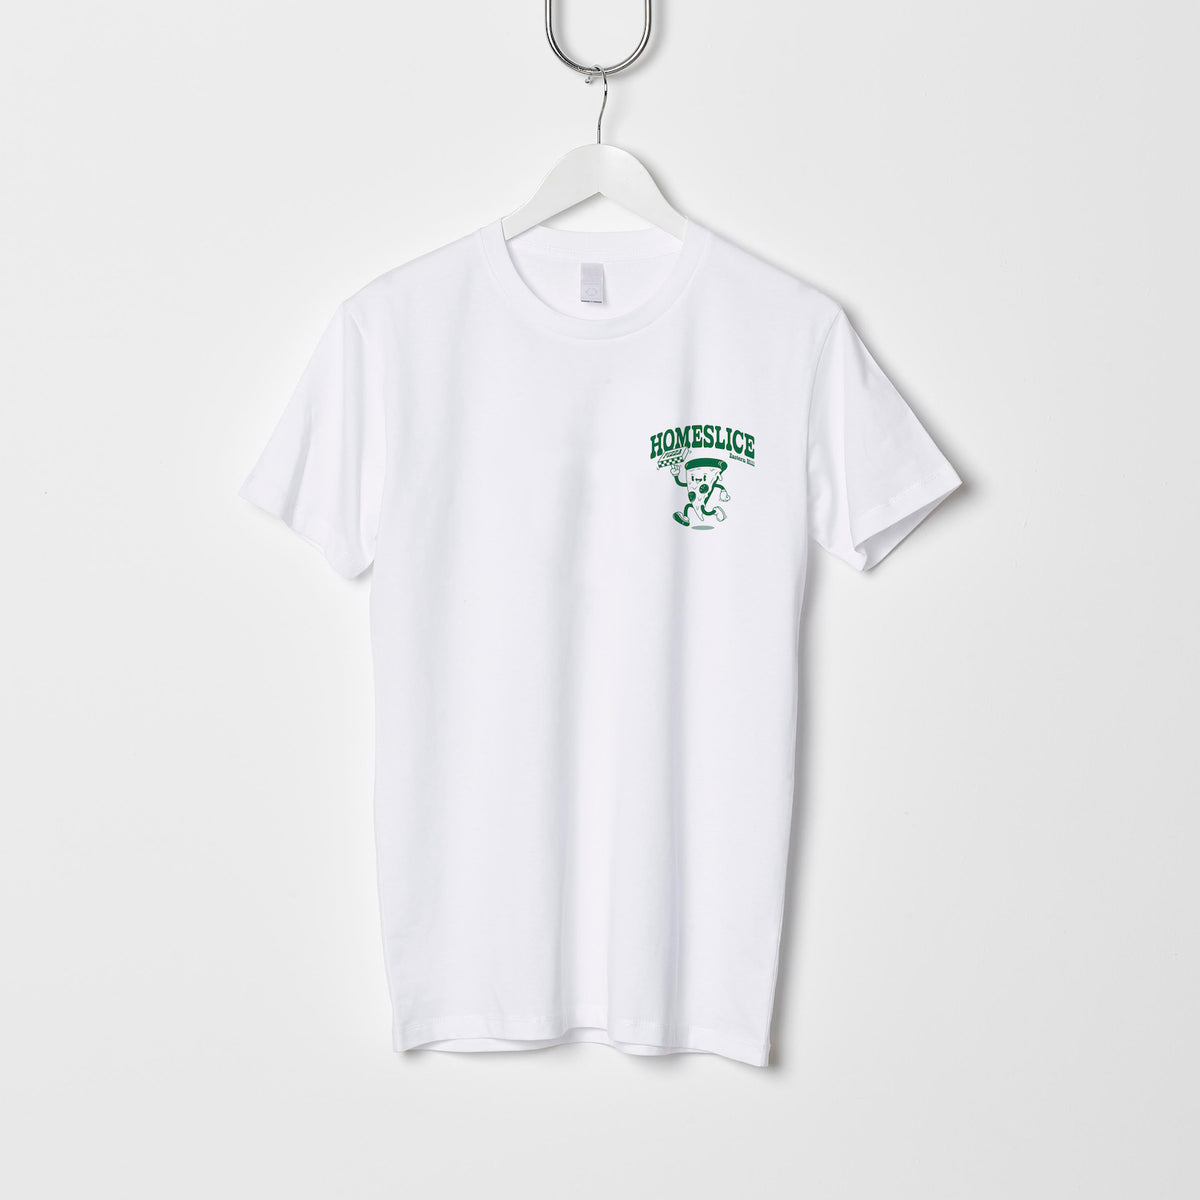 Eastern Hill General Supplies Homeslice Tee - White/Forest Green